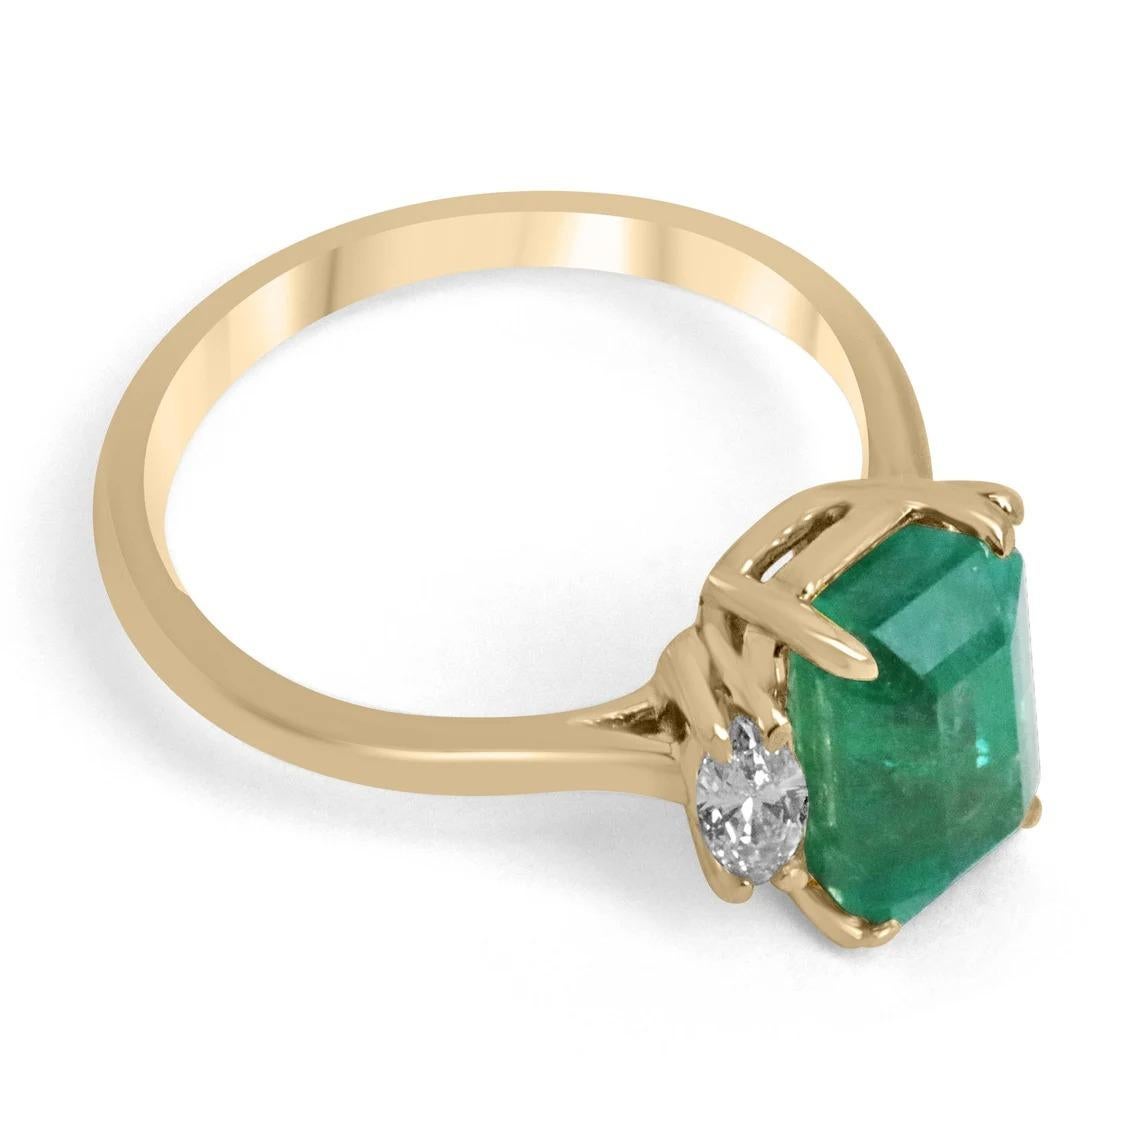 A remarkable emerald and diamond three-stone right-hand/engagement ring. This exceptional custom piece features a gorgeous emerald cut emerald from the origin of Zambia. The gemstone showcases a stunning medium dark green color, with a tint of